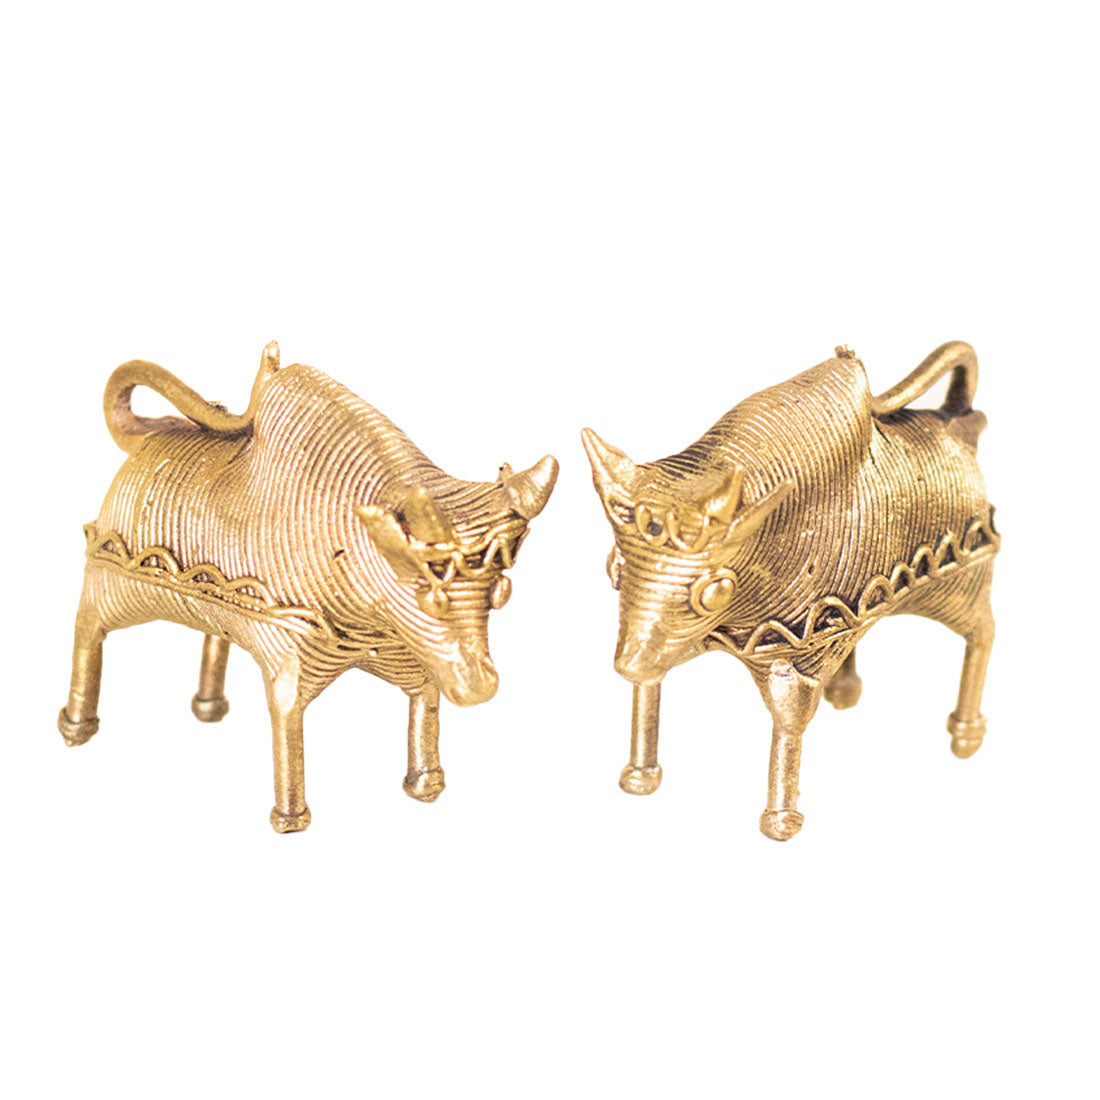 Two Bull Figurines in Brass